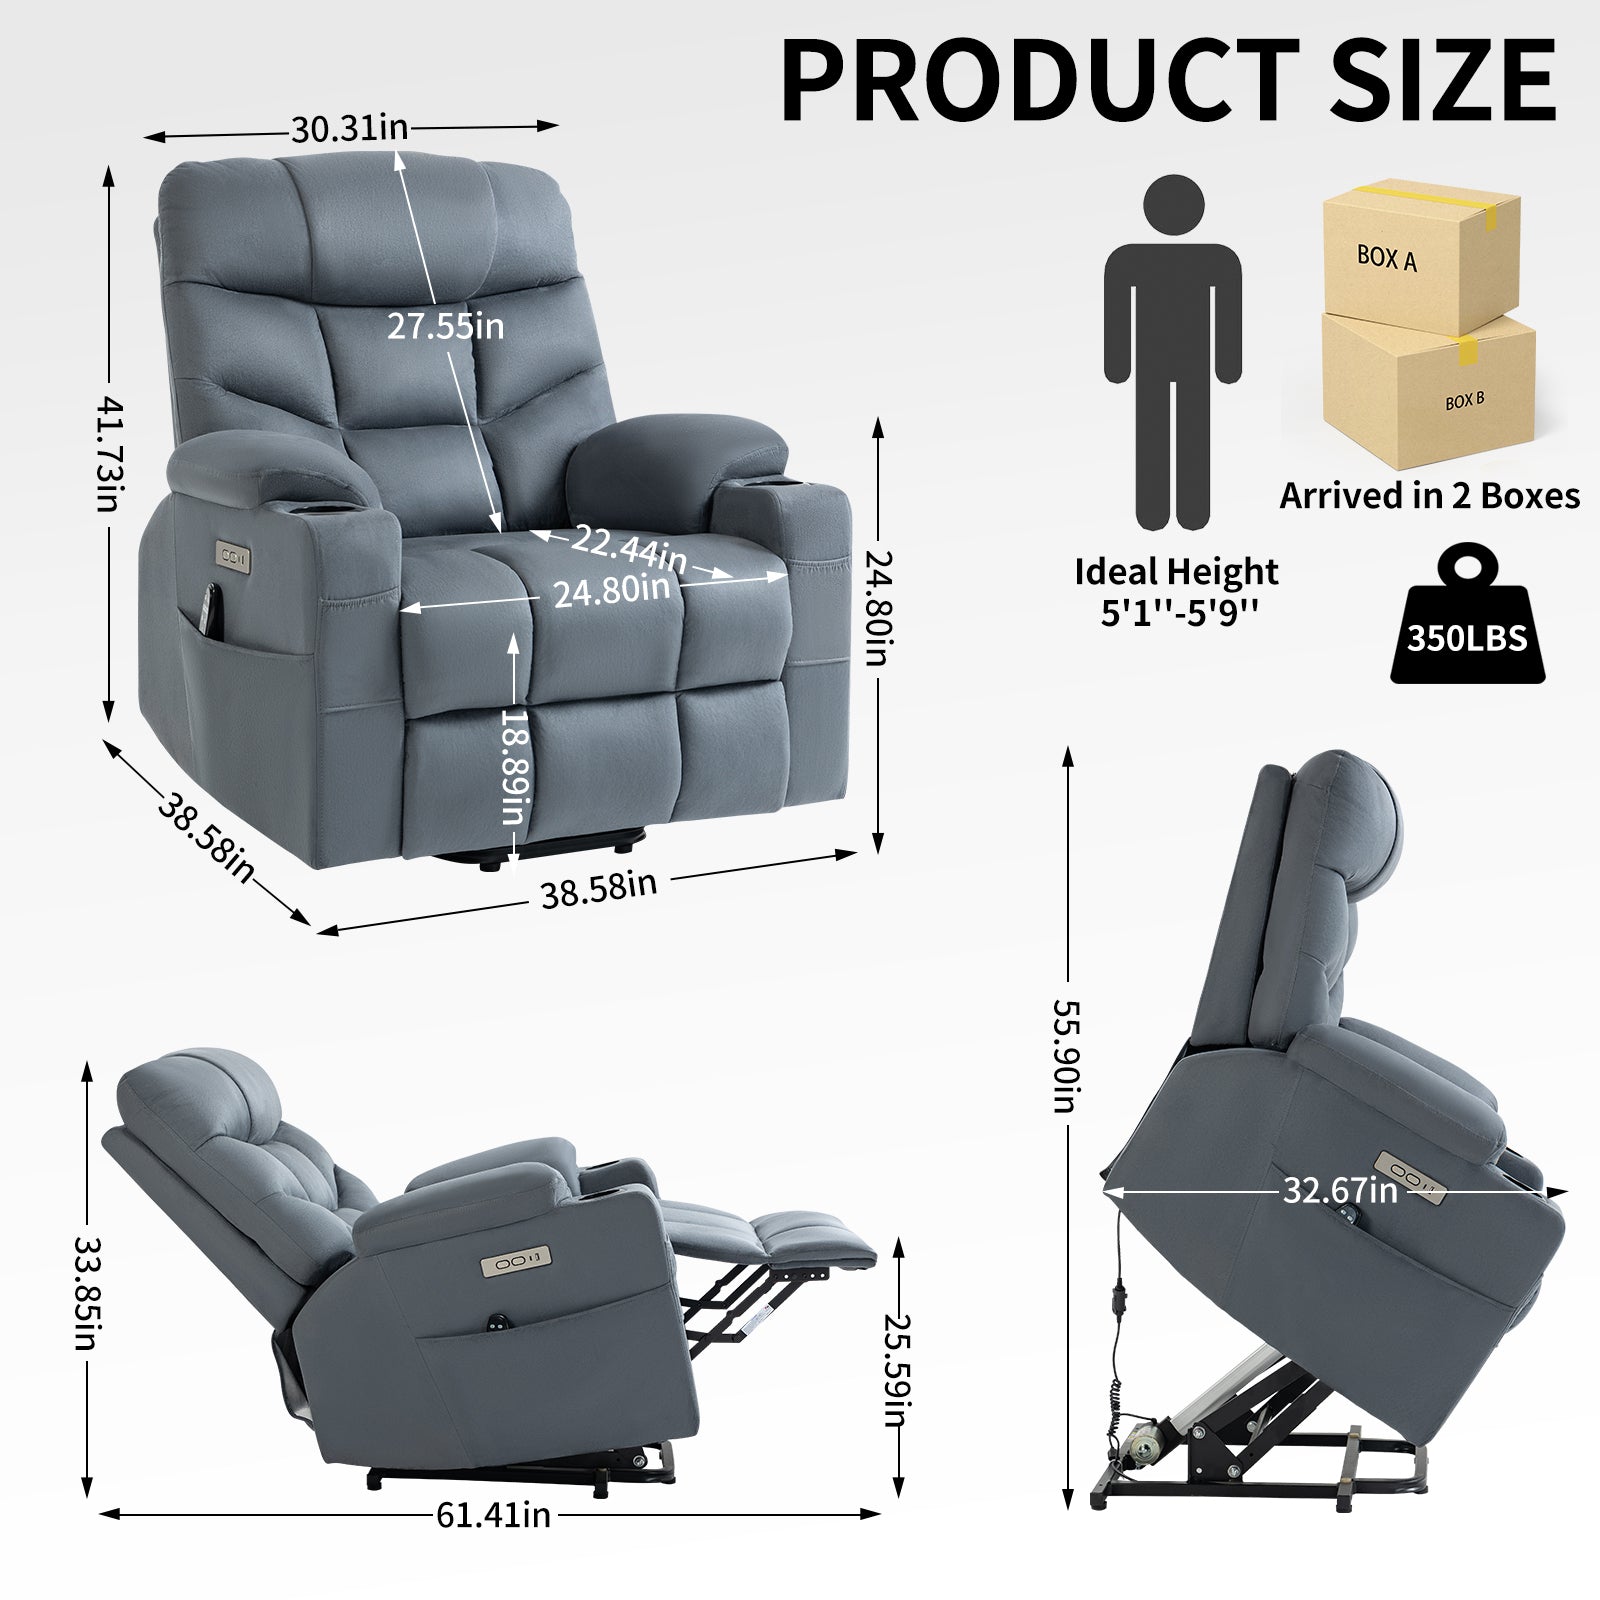 Blue Power Lift Recliner Chair with Vibration Massage and Lumbar Heat, dimensions